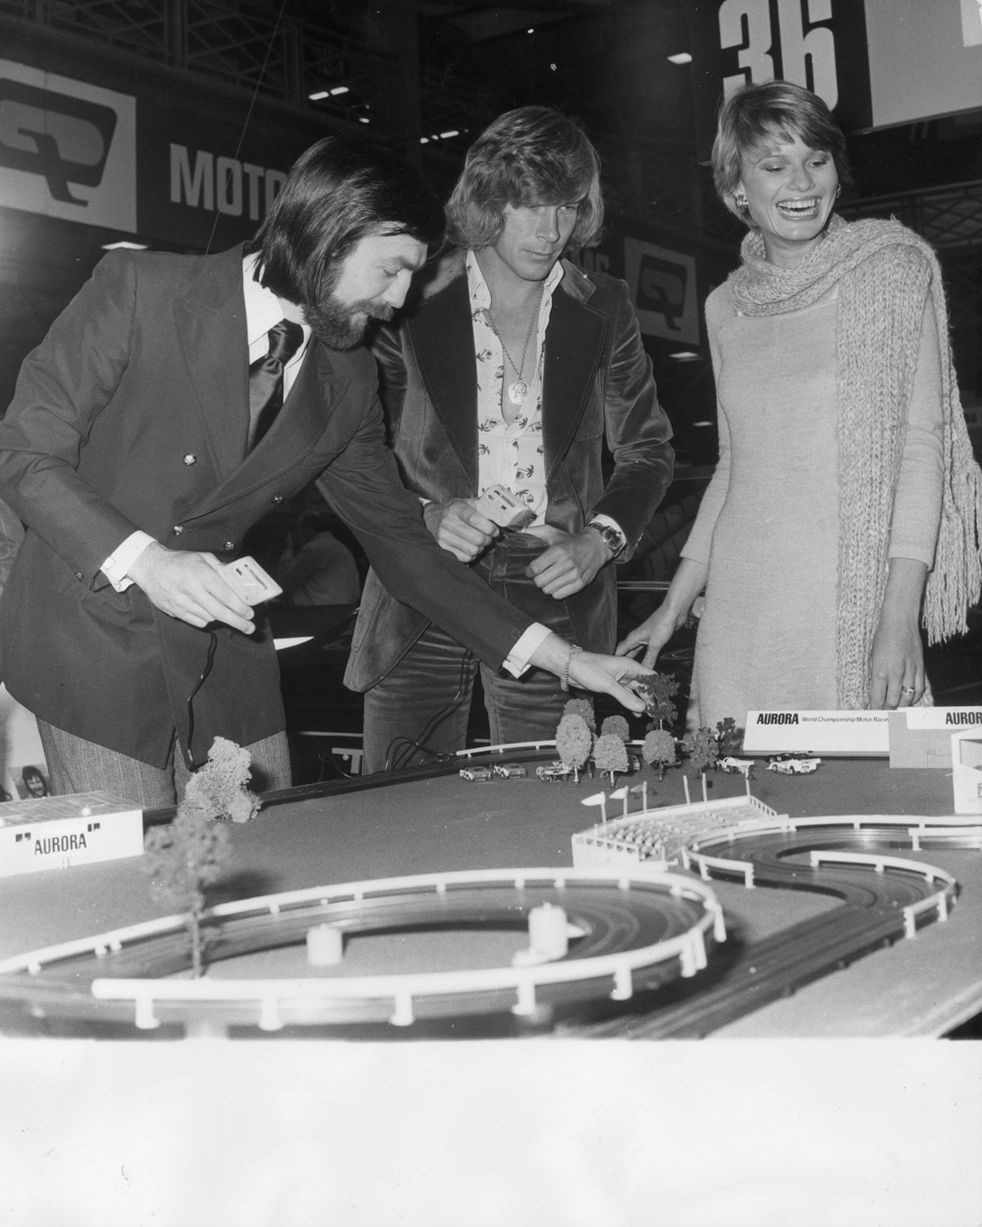 Mike Wilds and James Hunt playing with the Aurora model race track at the 12th International Racing Car Show at Olympia on 02 January 1974. 